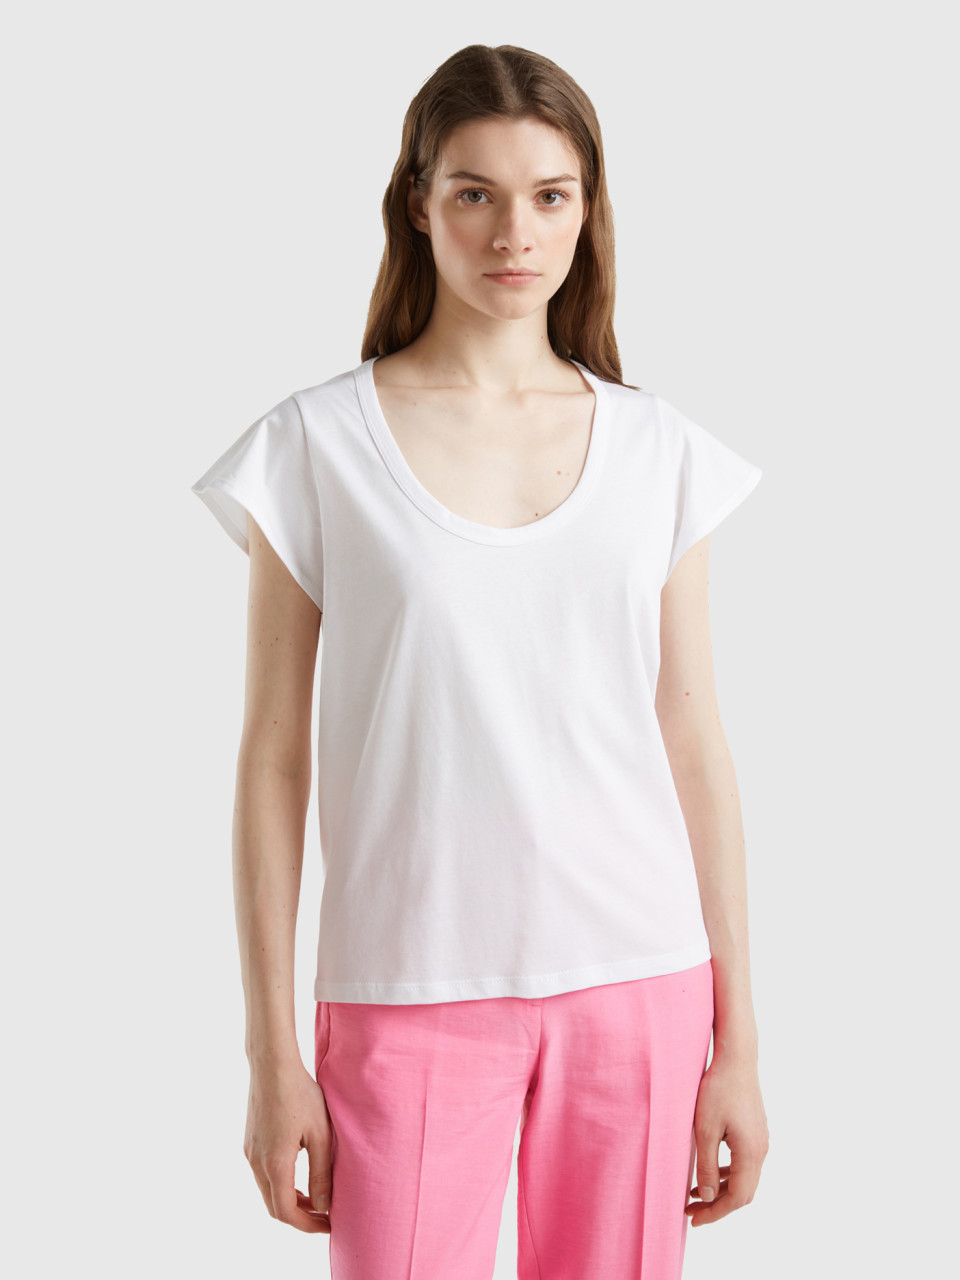 Benetton, T-shirt With Wide Neck, White, Women